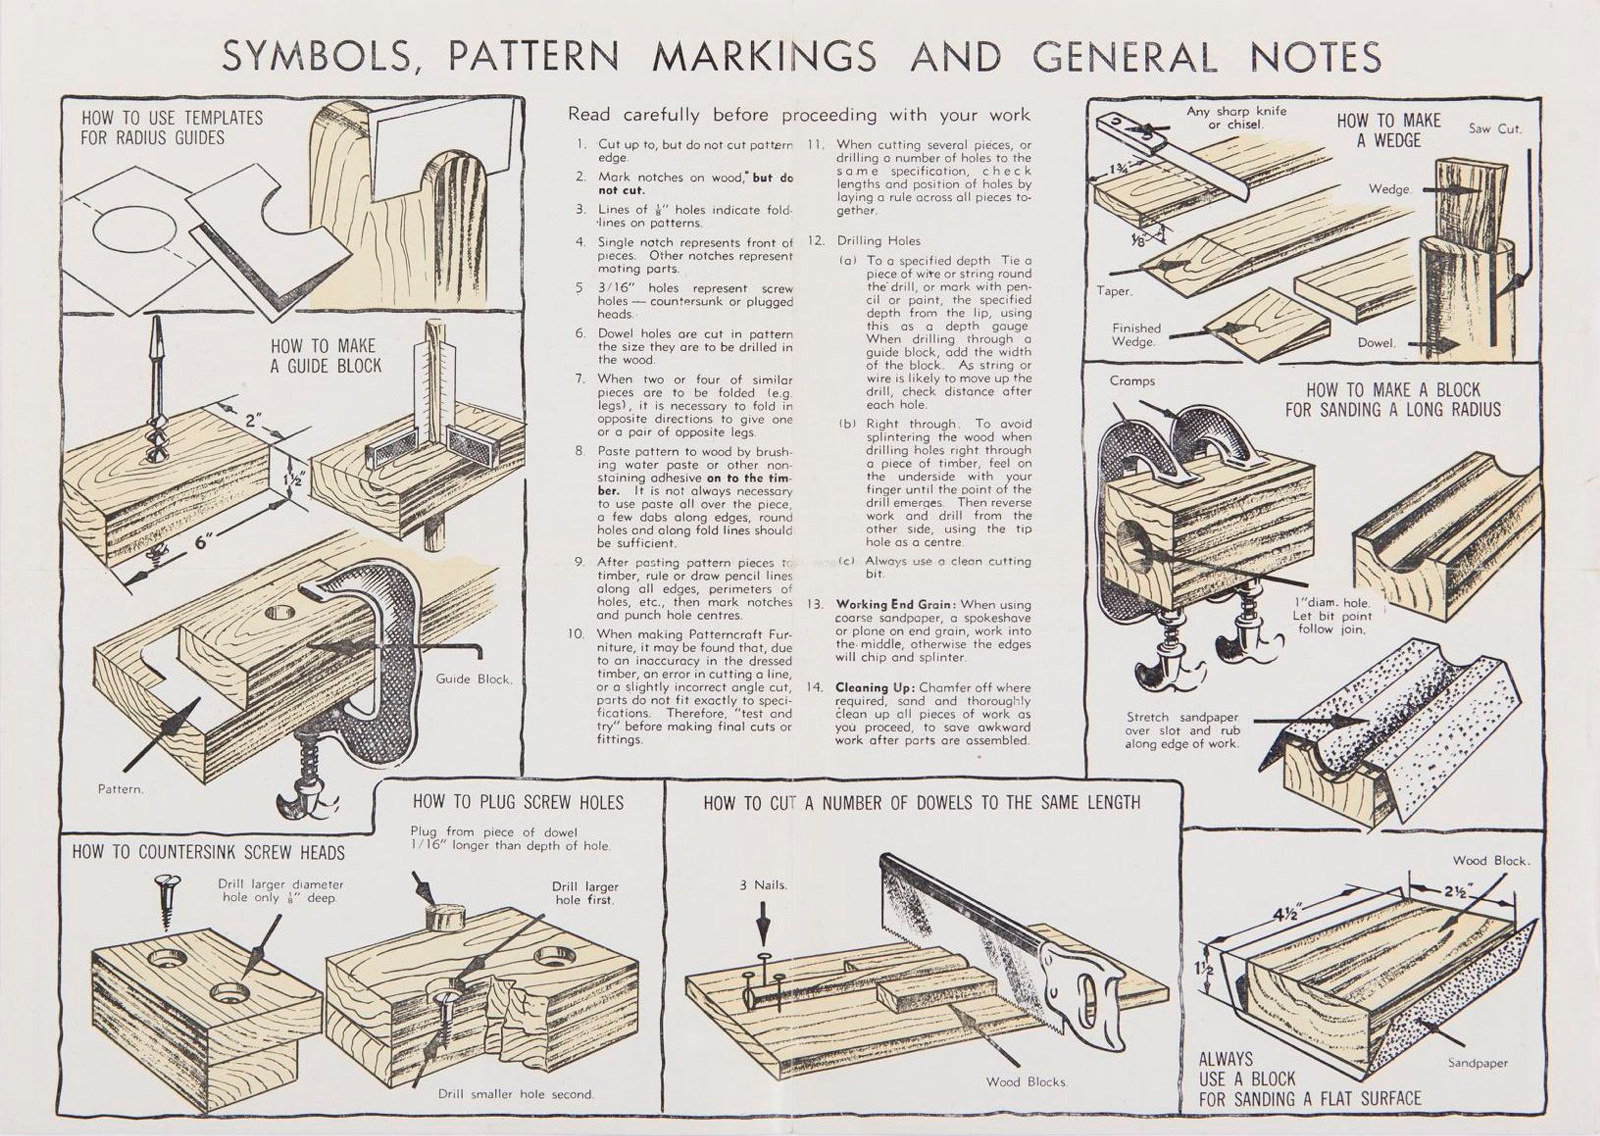 Verso of promotional brochure for Patterncraft furniture patterns, 1947